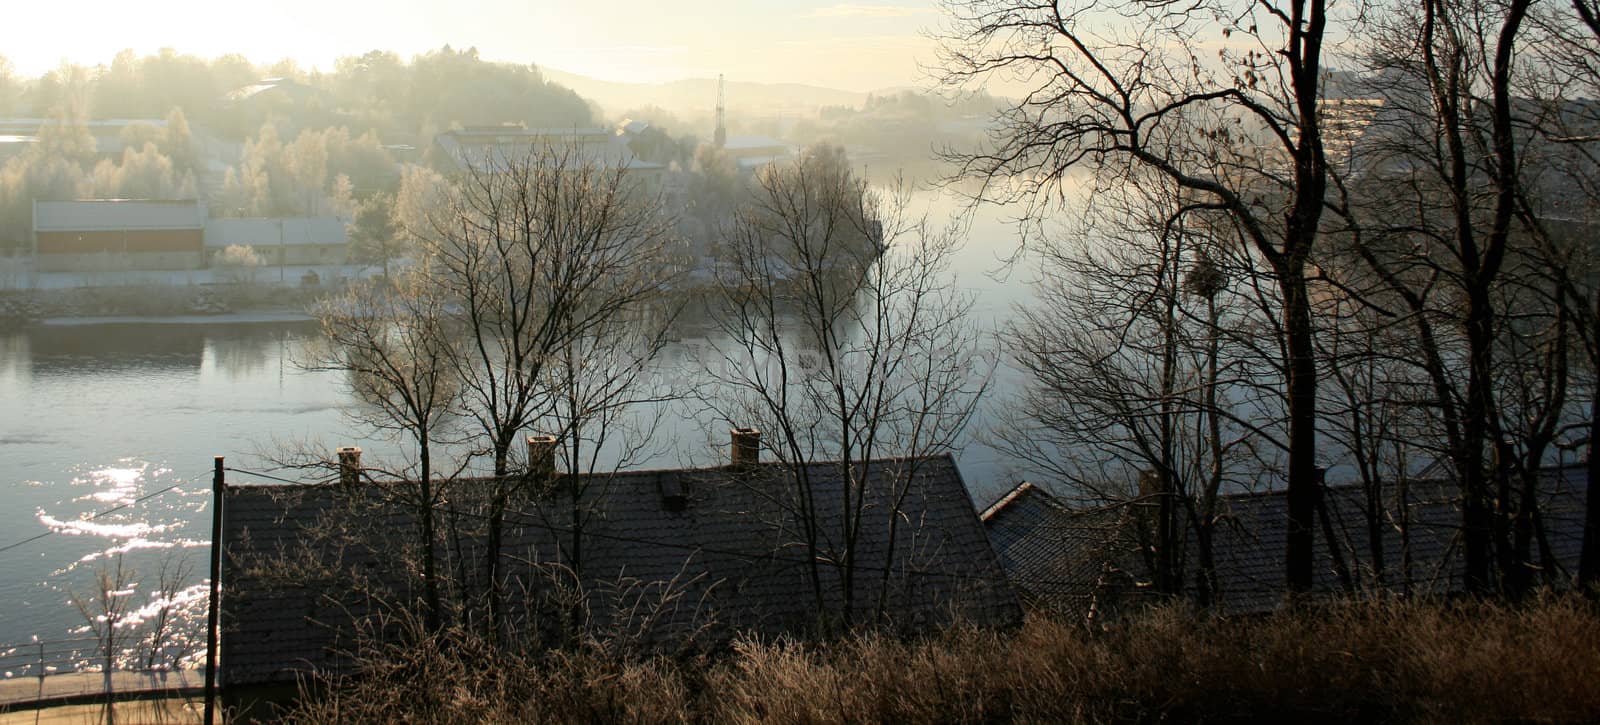 View over a foggy river, roof in the front, trees with some houses in the background